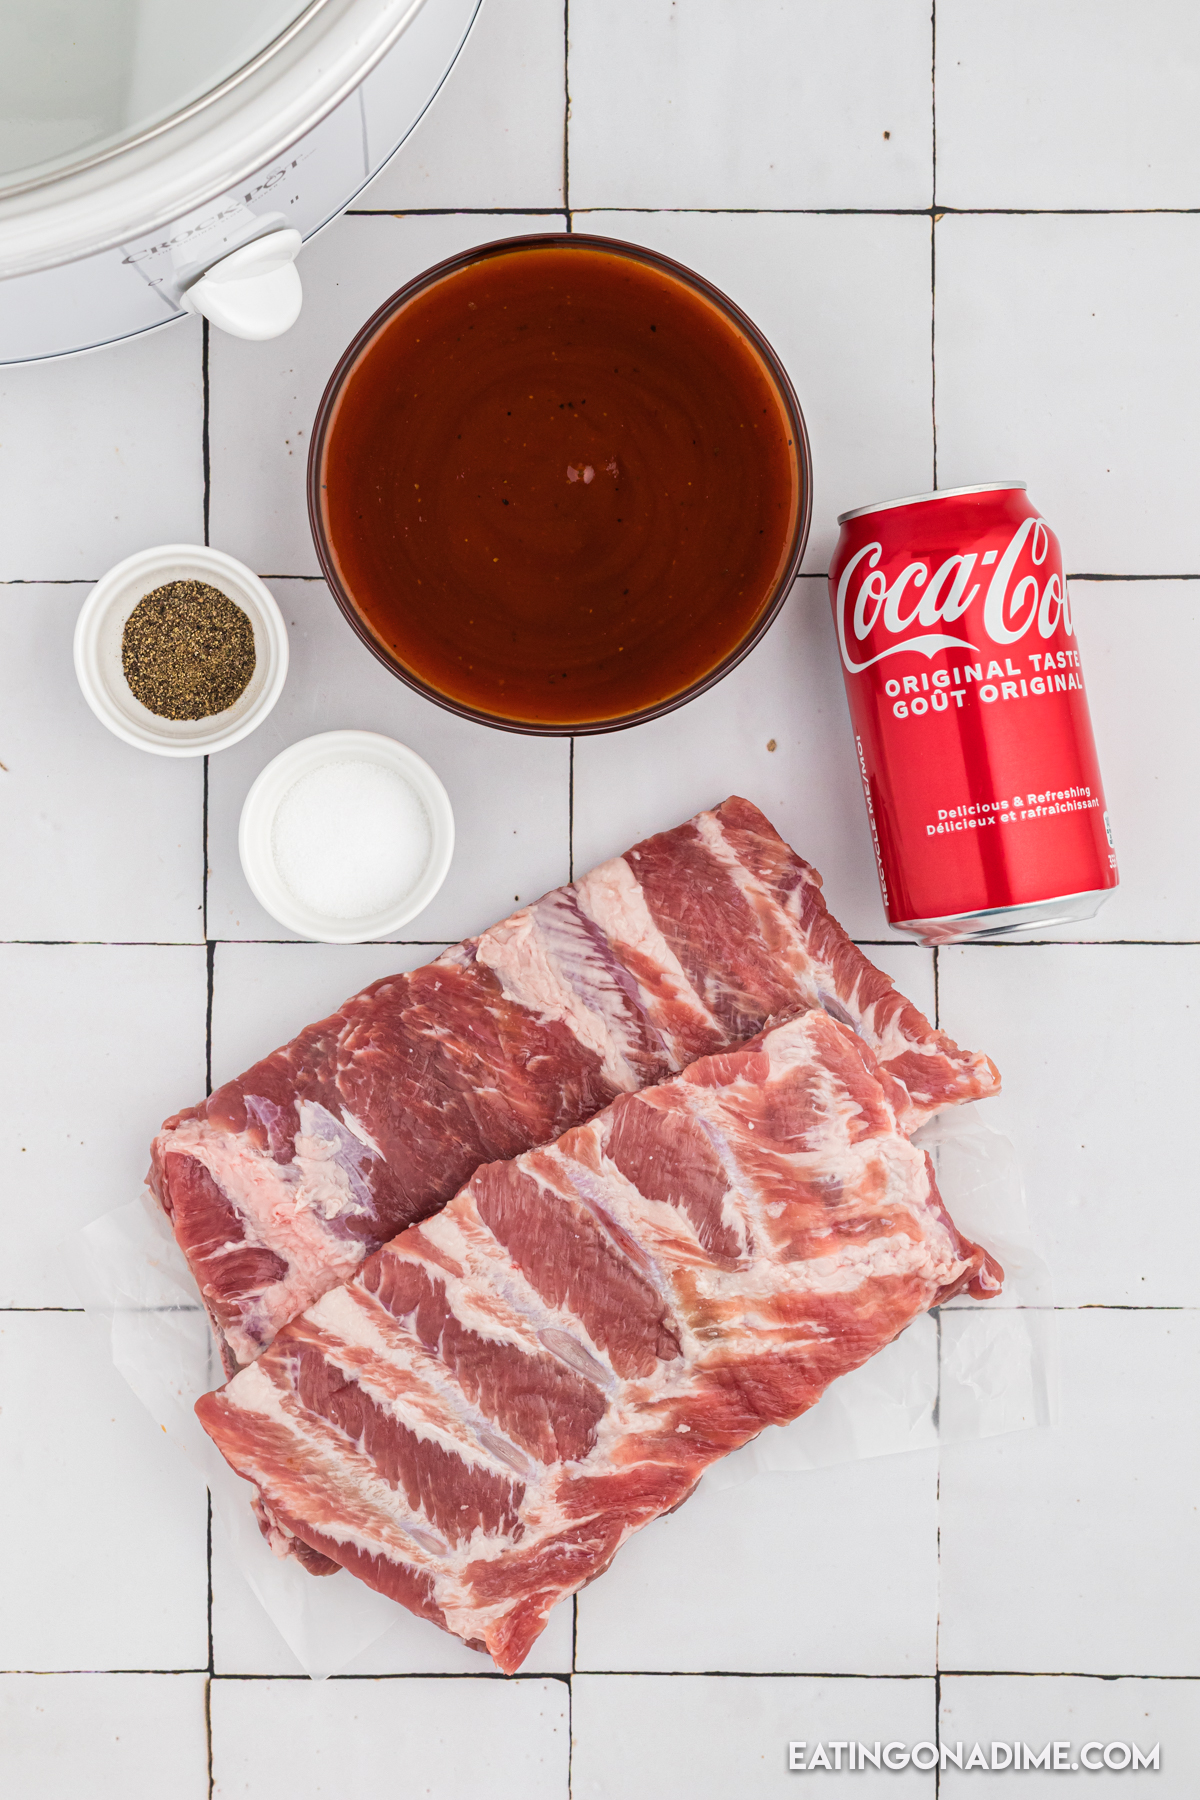 Ingredients for crock pot ribs with coke